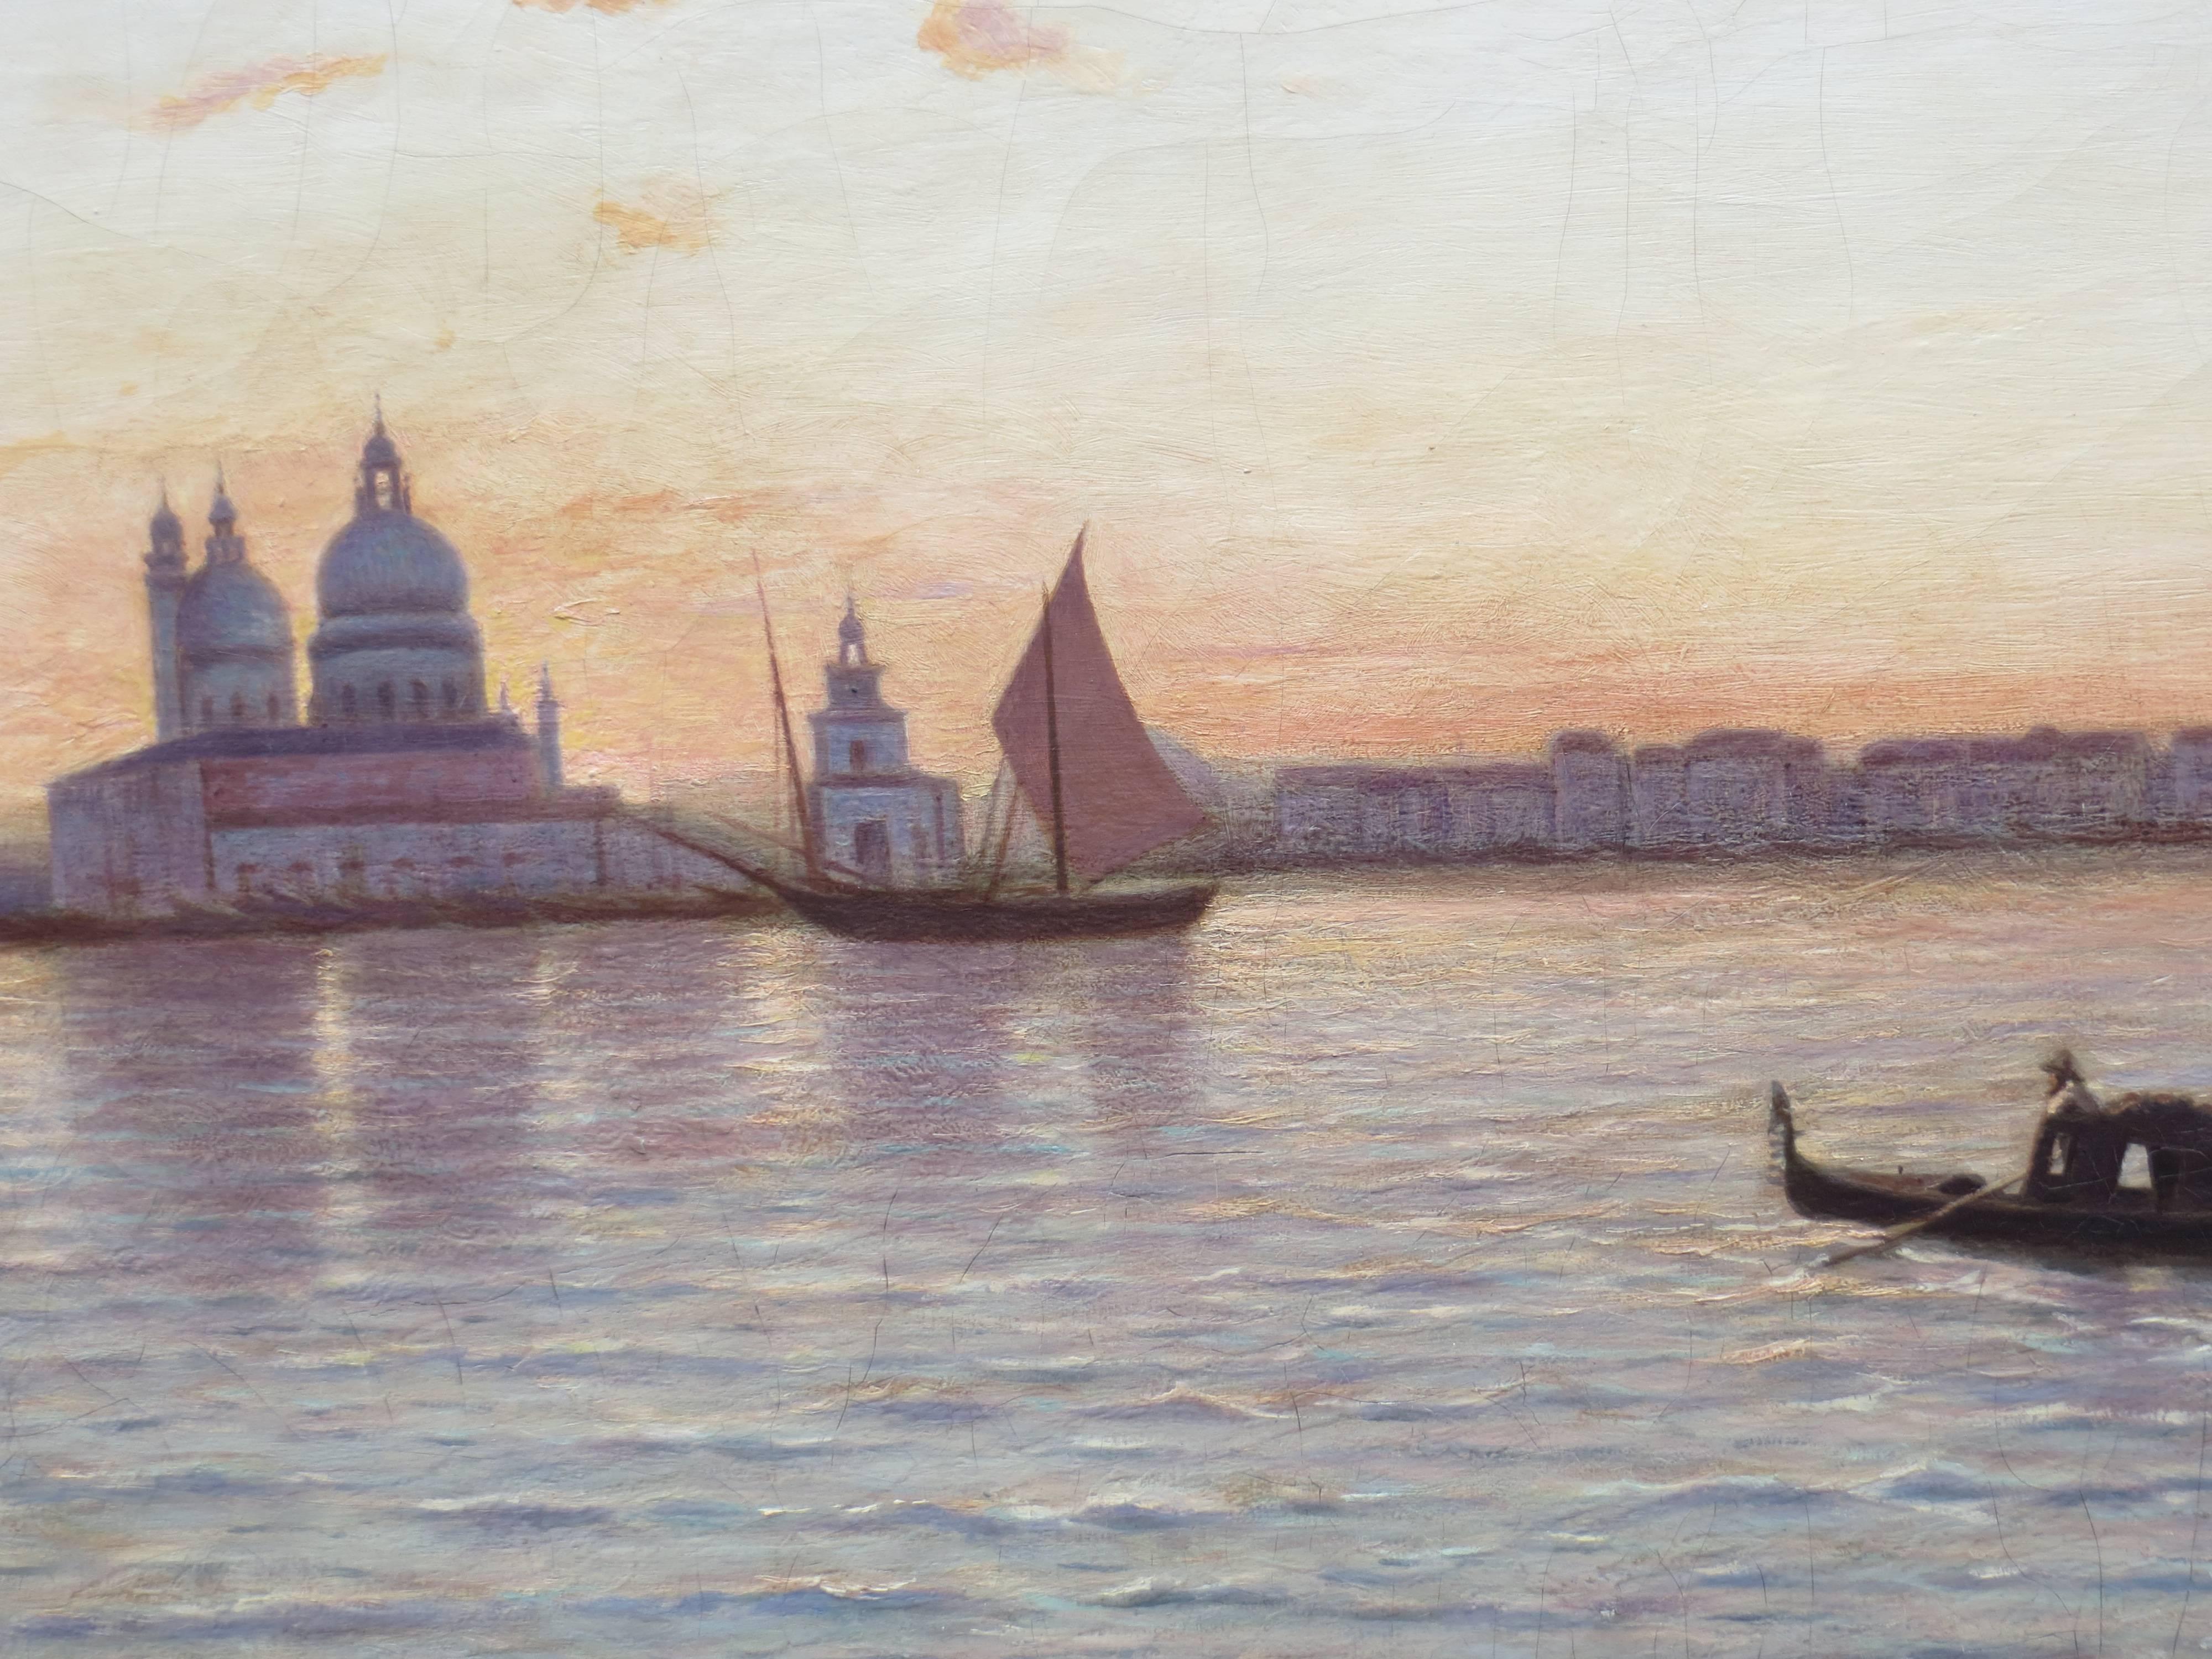 Venice - Painting by Adolph Potter